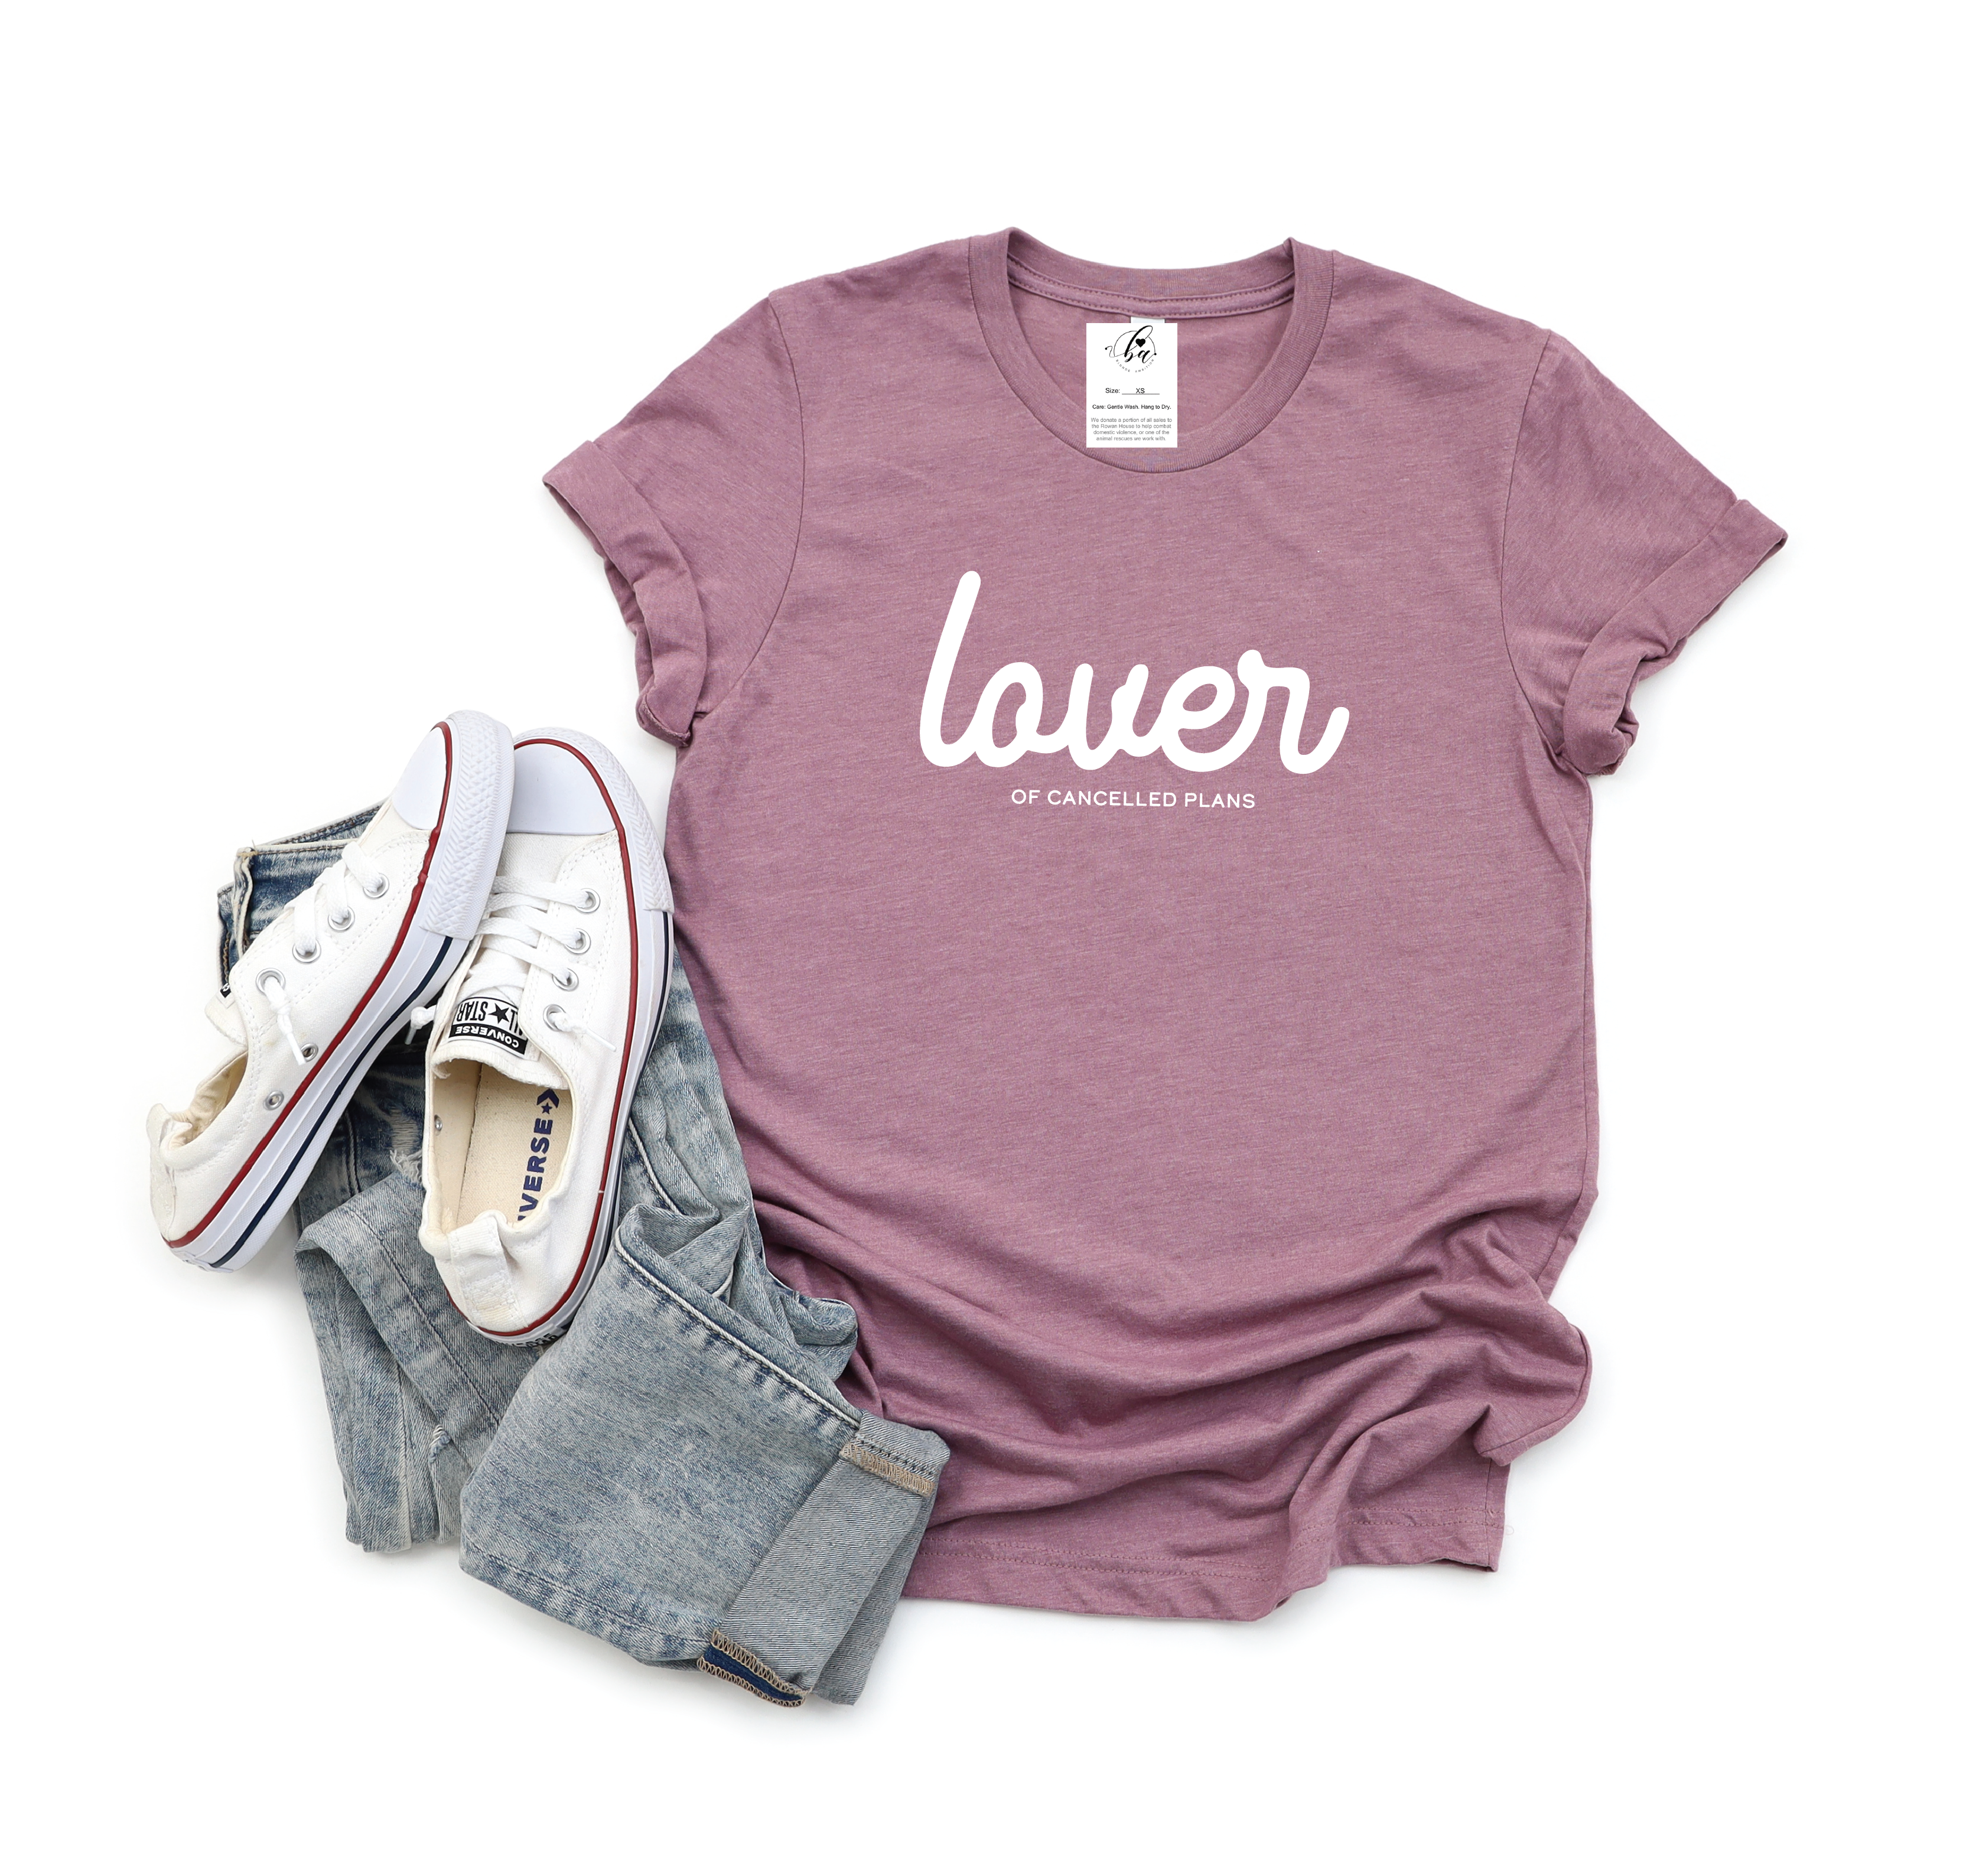 Lover of Cancelled Plans Tee